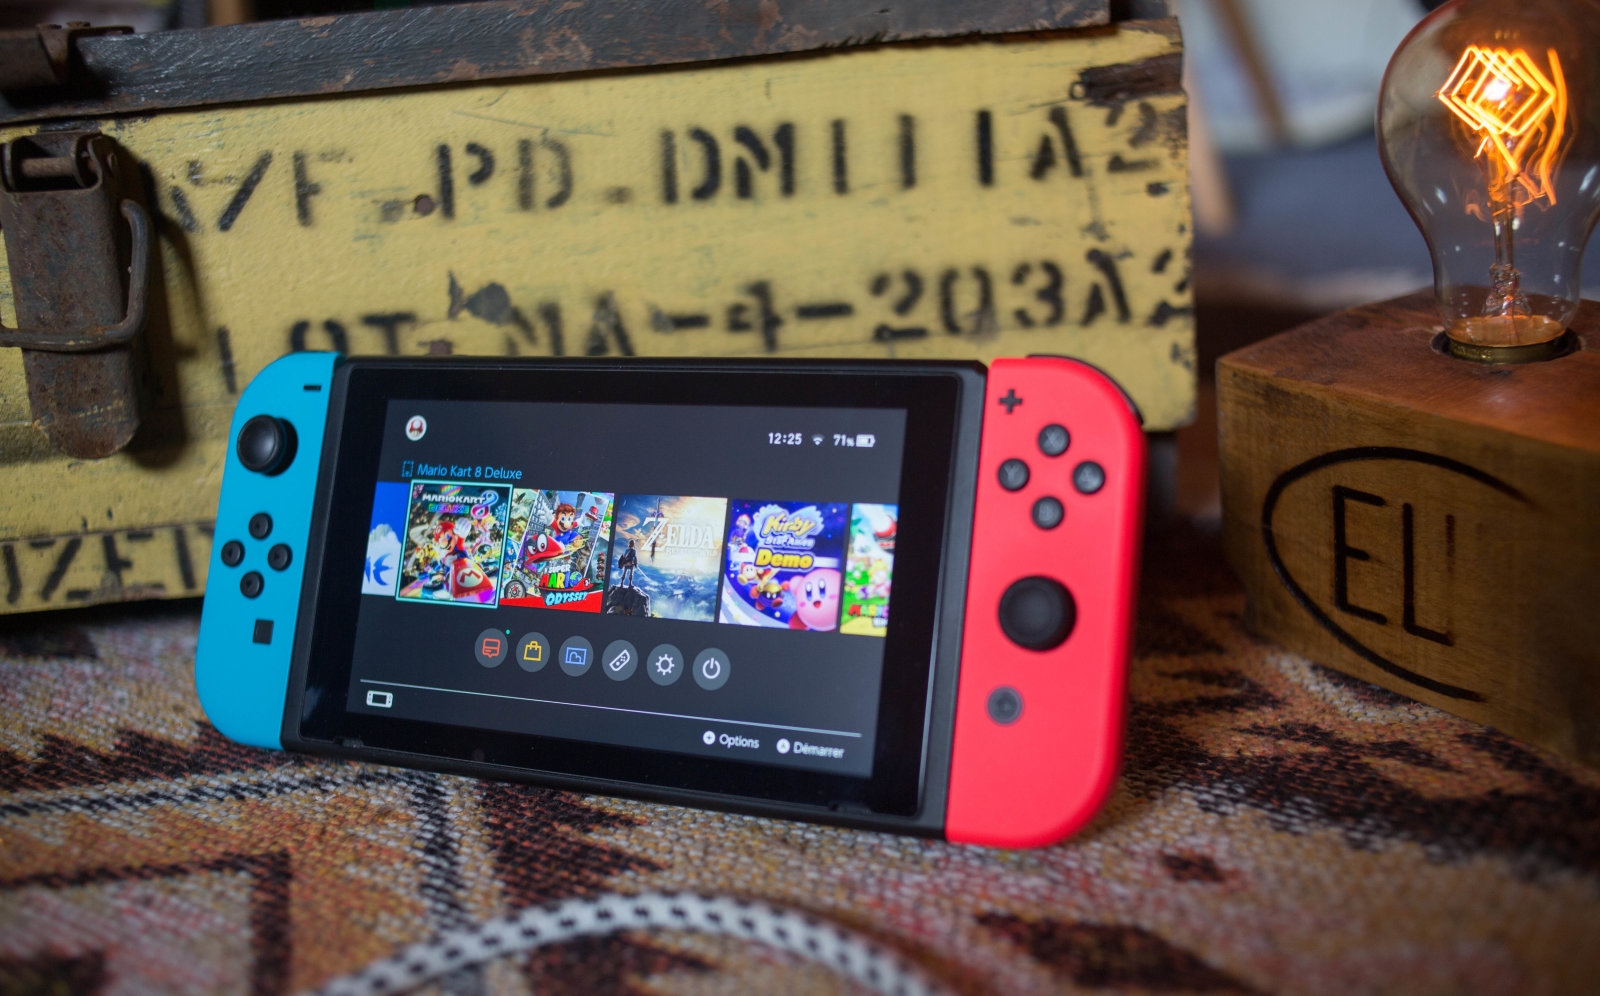 Report: Nintendo will repair Switch Joy-Cons with 'drift' issue for free | DeviceDaily.com